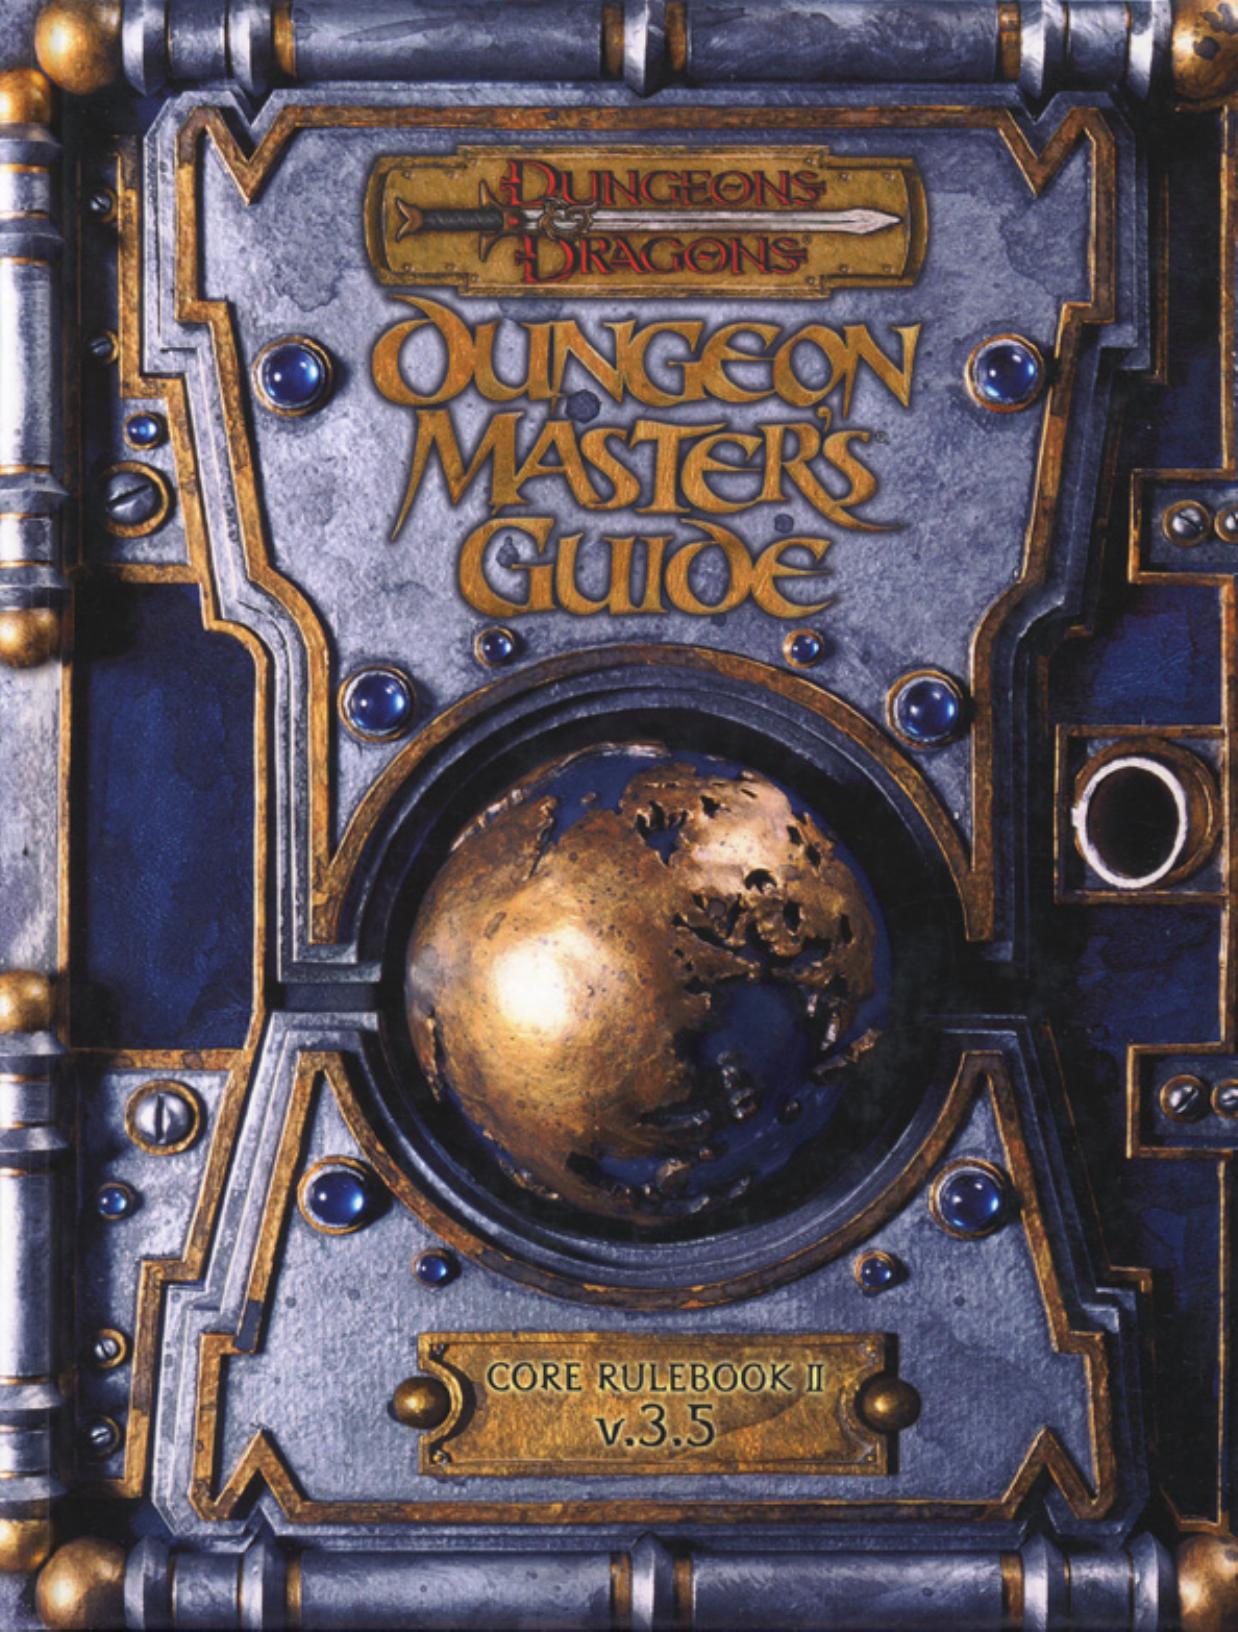 Dungeon Master's Guide: Core Rulebook II v. 3.5